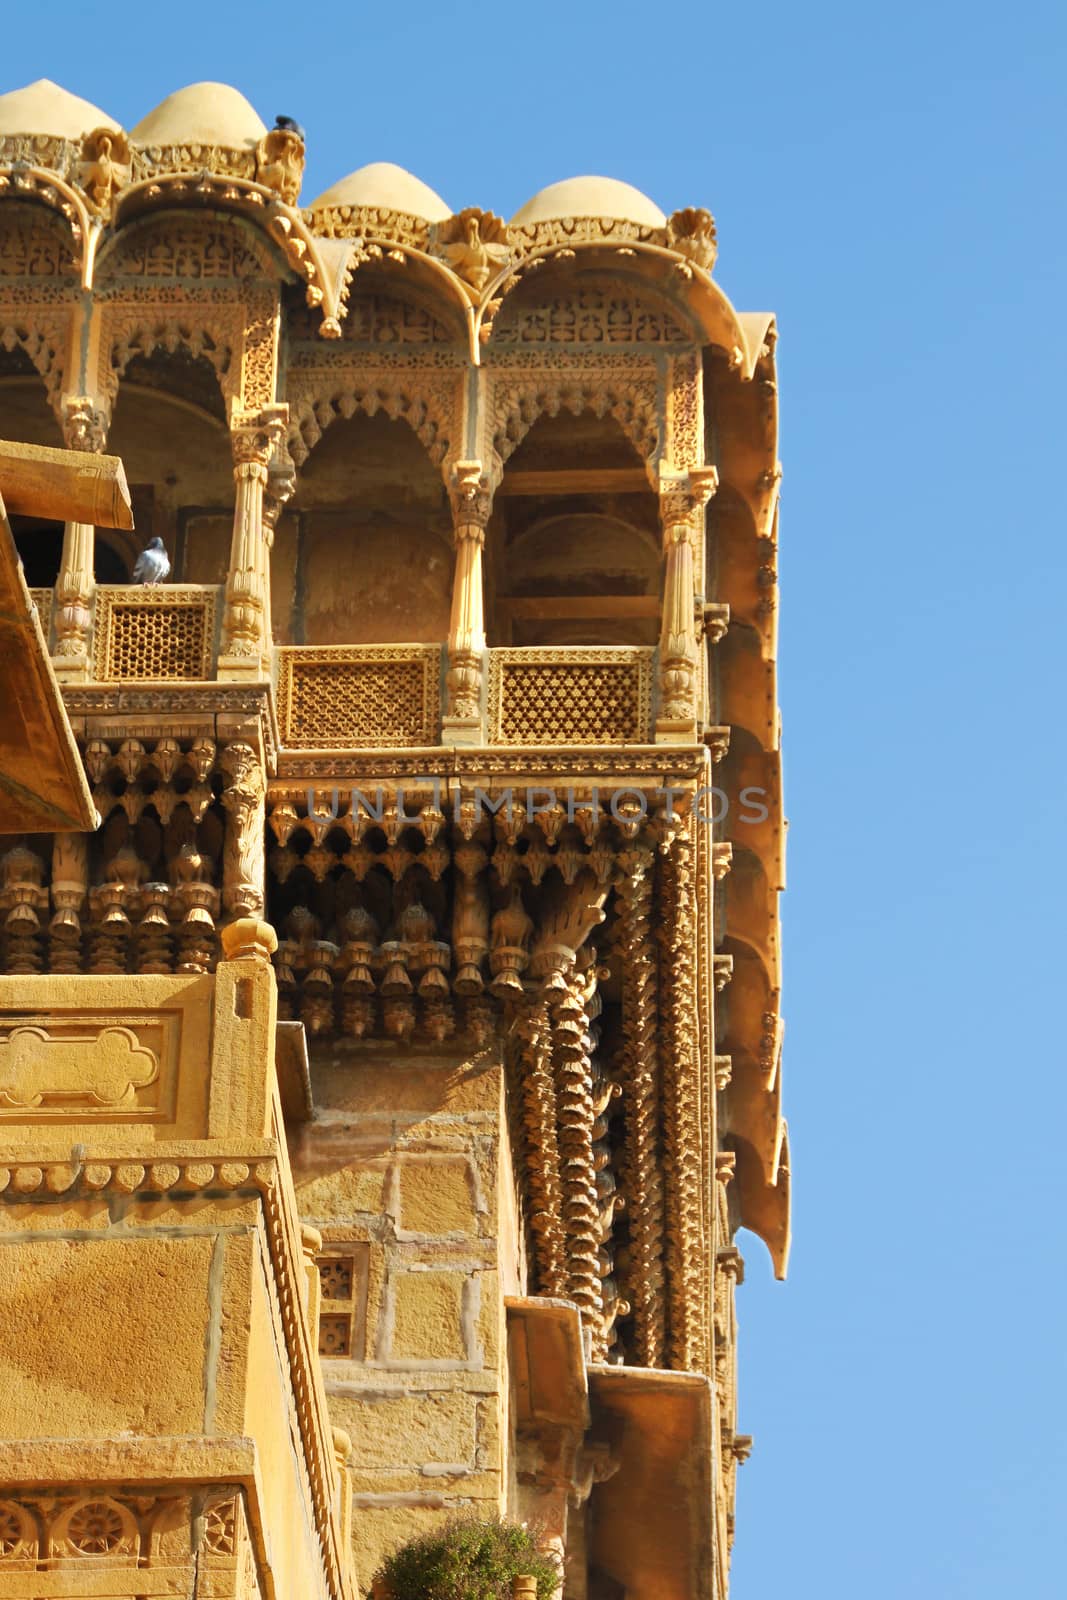 The façade of a stately home in Jaipur, Rajastan in India. These homes were built and lived in by wealthy traders and courtiers of the Rajput maharajas